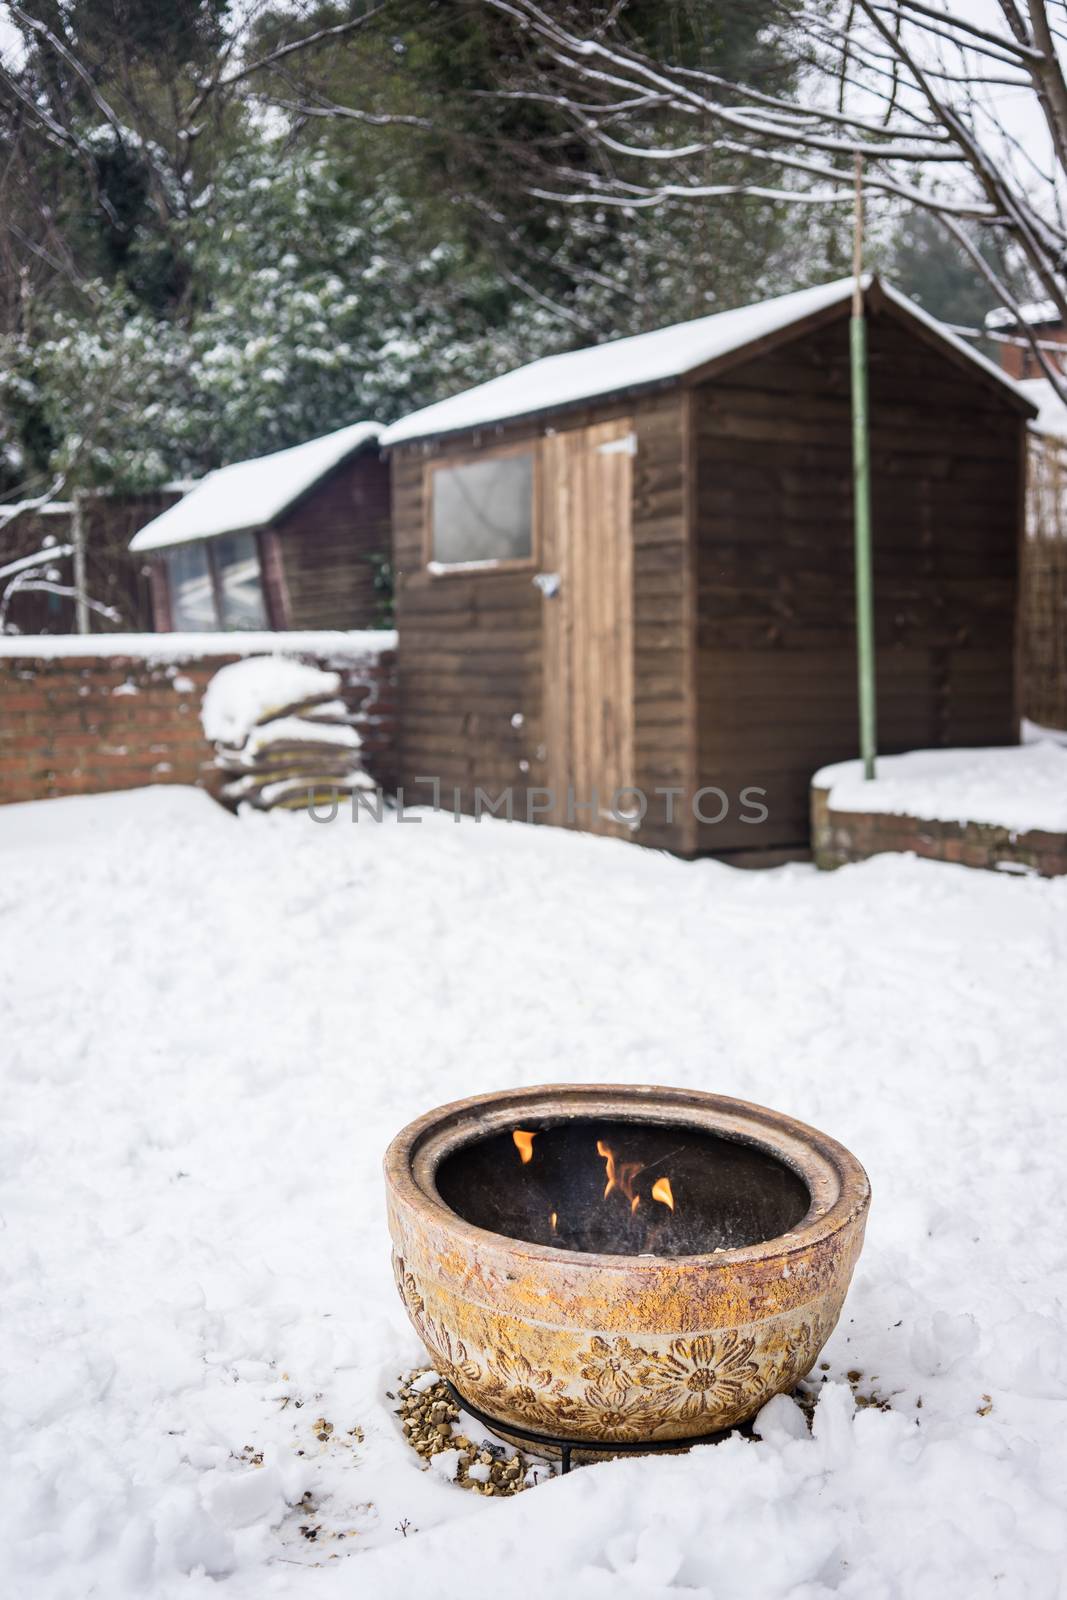 Fire bowl heating in a cold snowy winter.